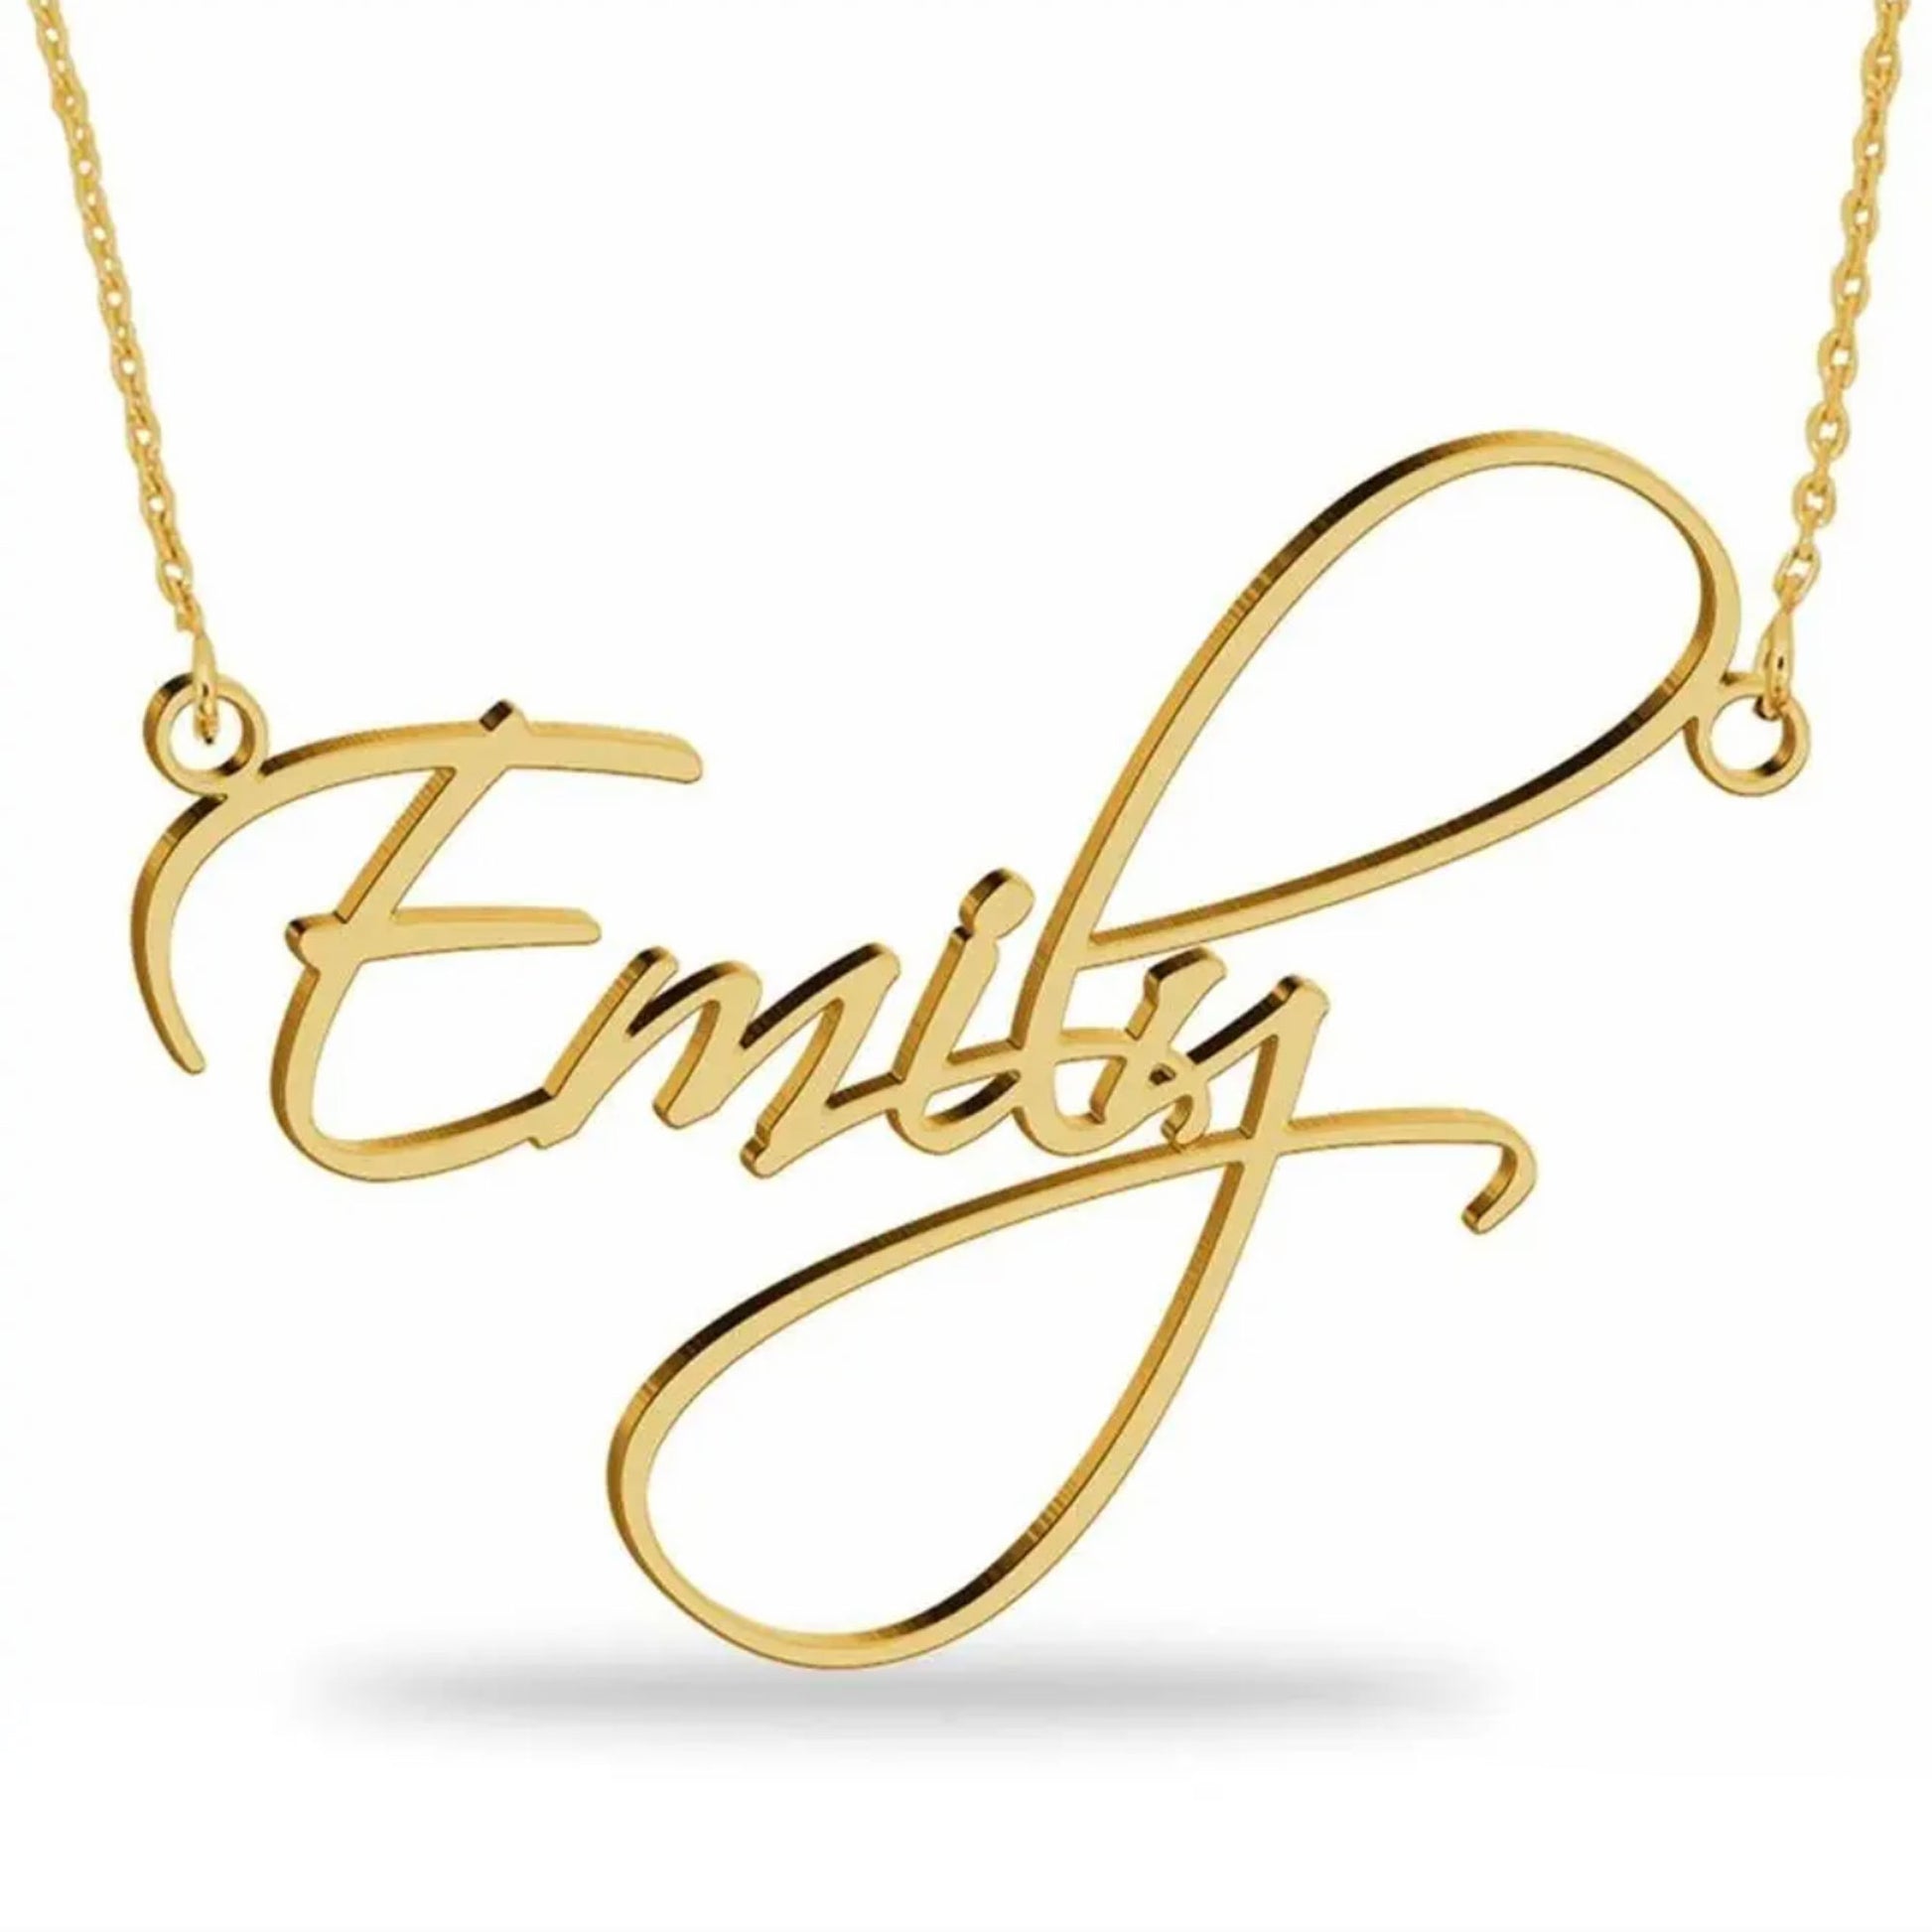 The Gold Link Chain from the Personalized Script Name Necklace, viewed up close.